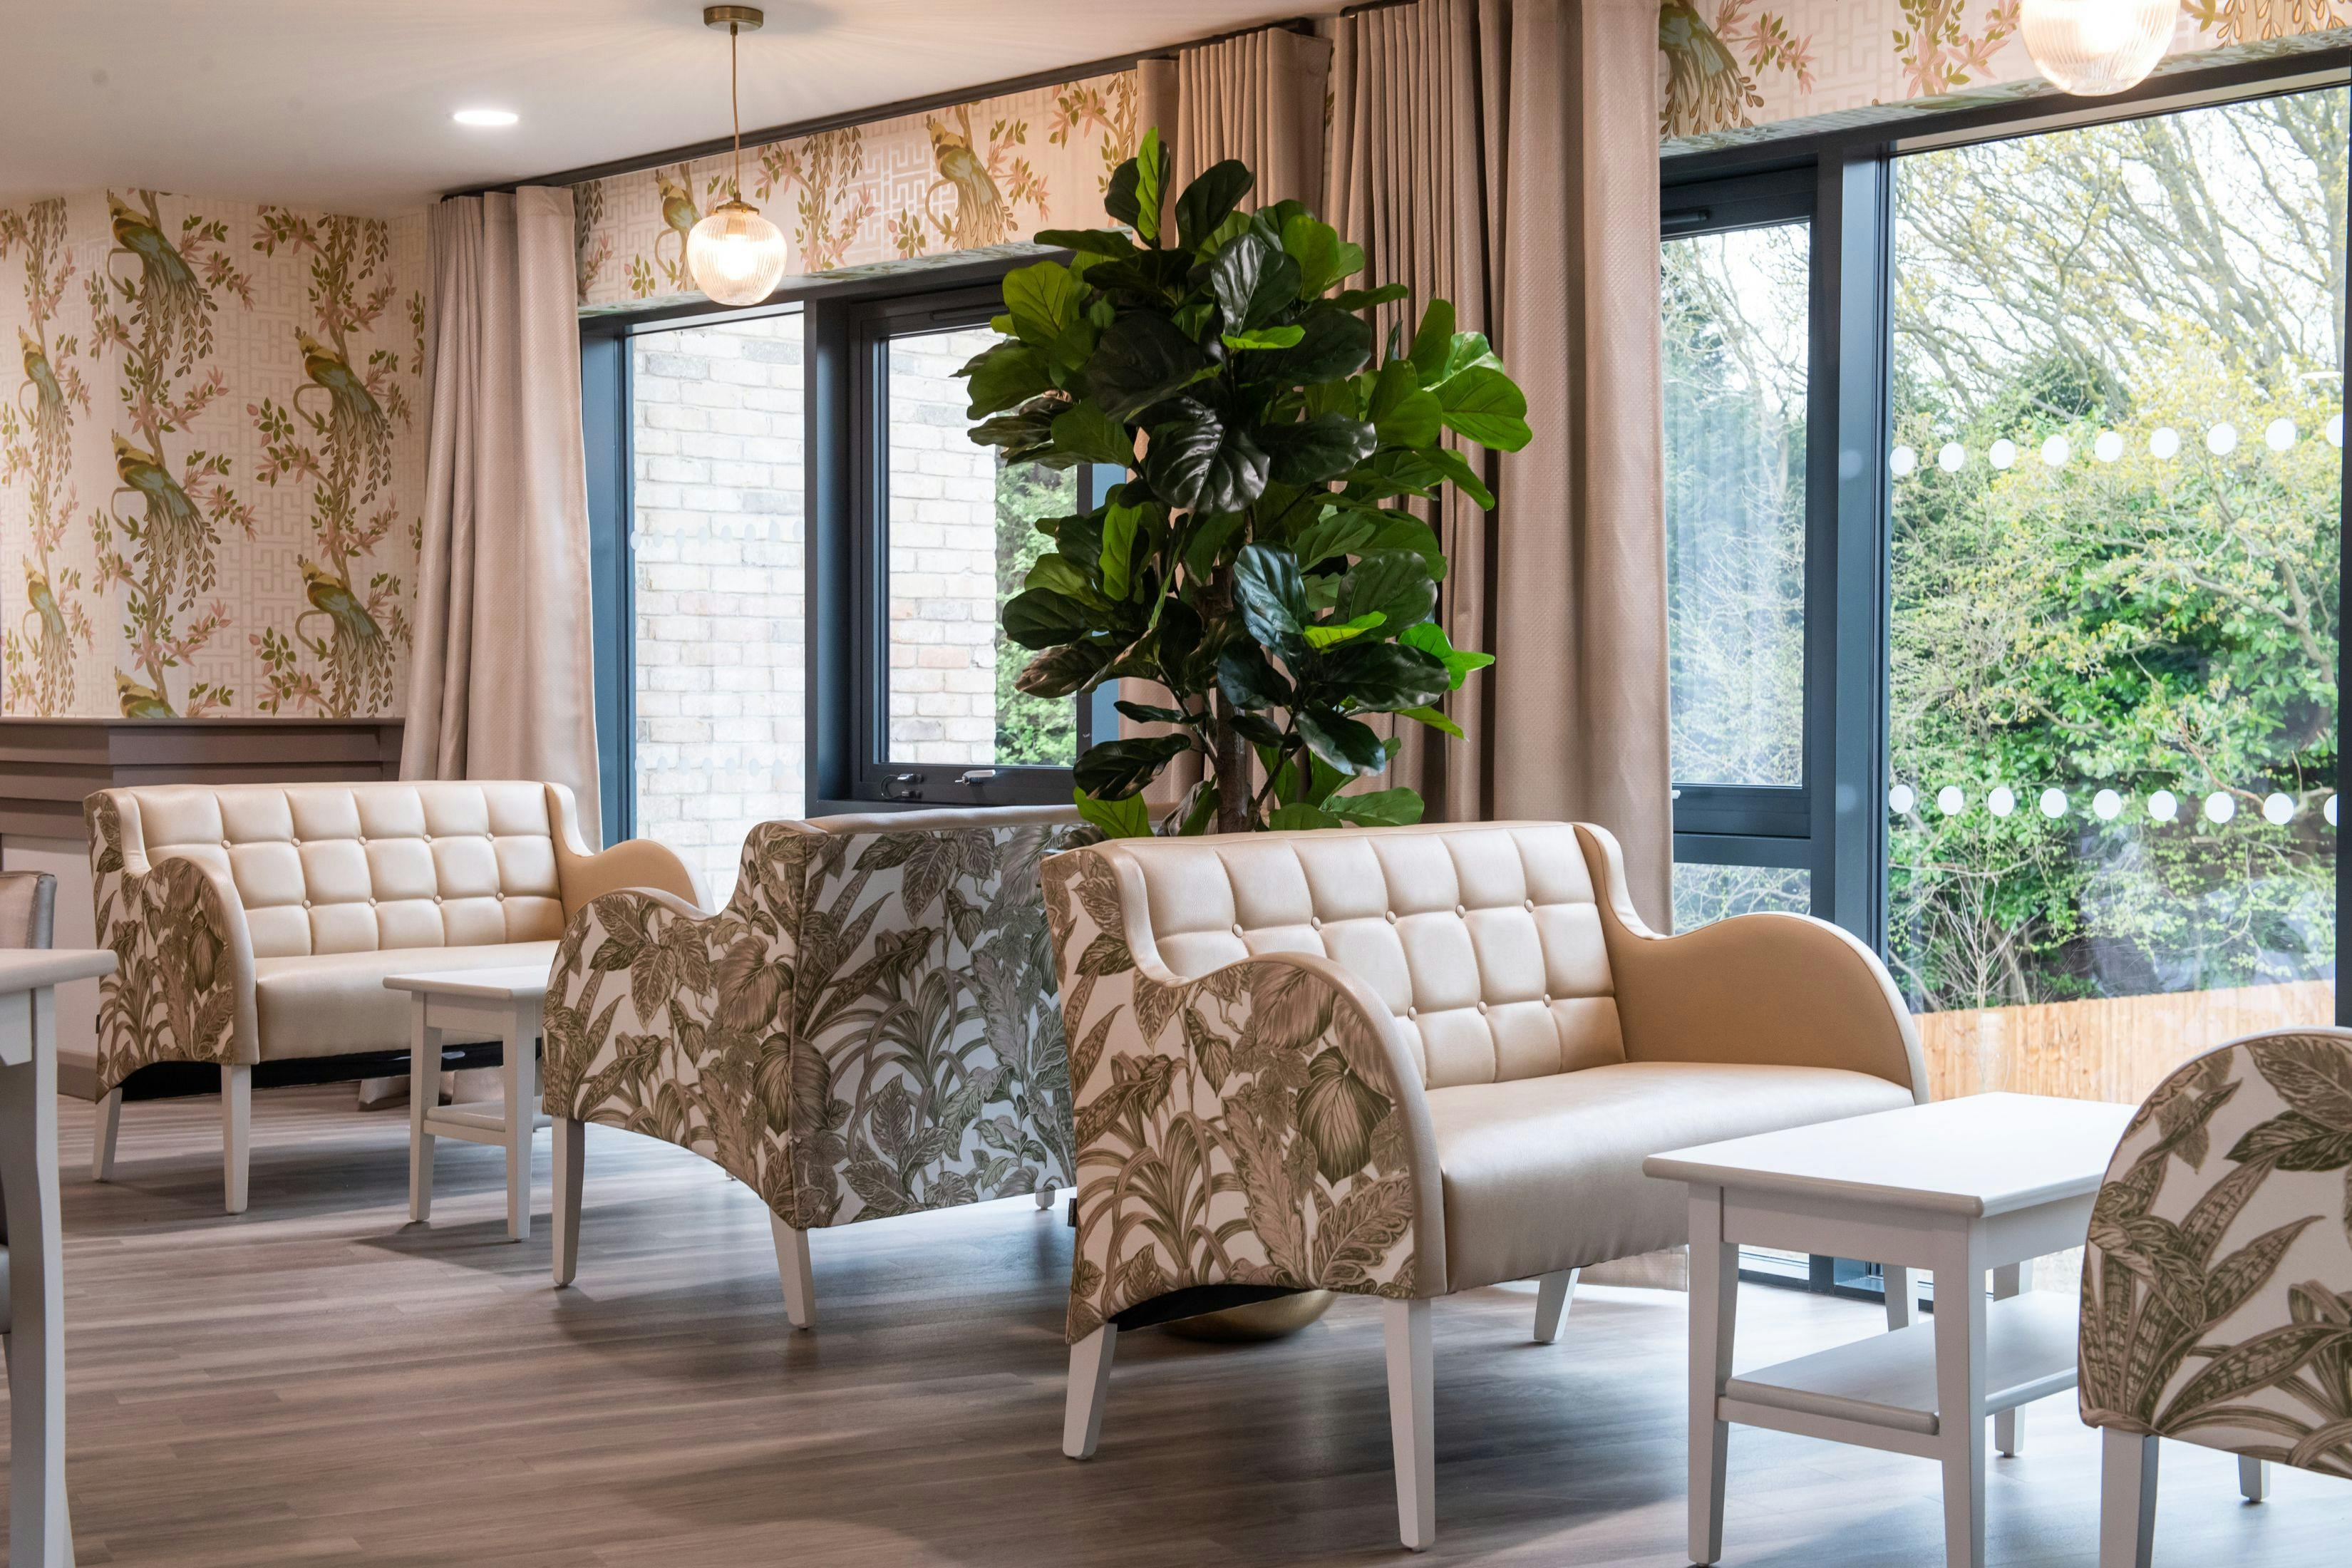 New Care - Adel Manor care home 8